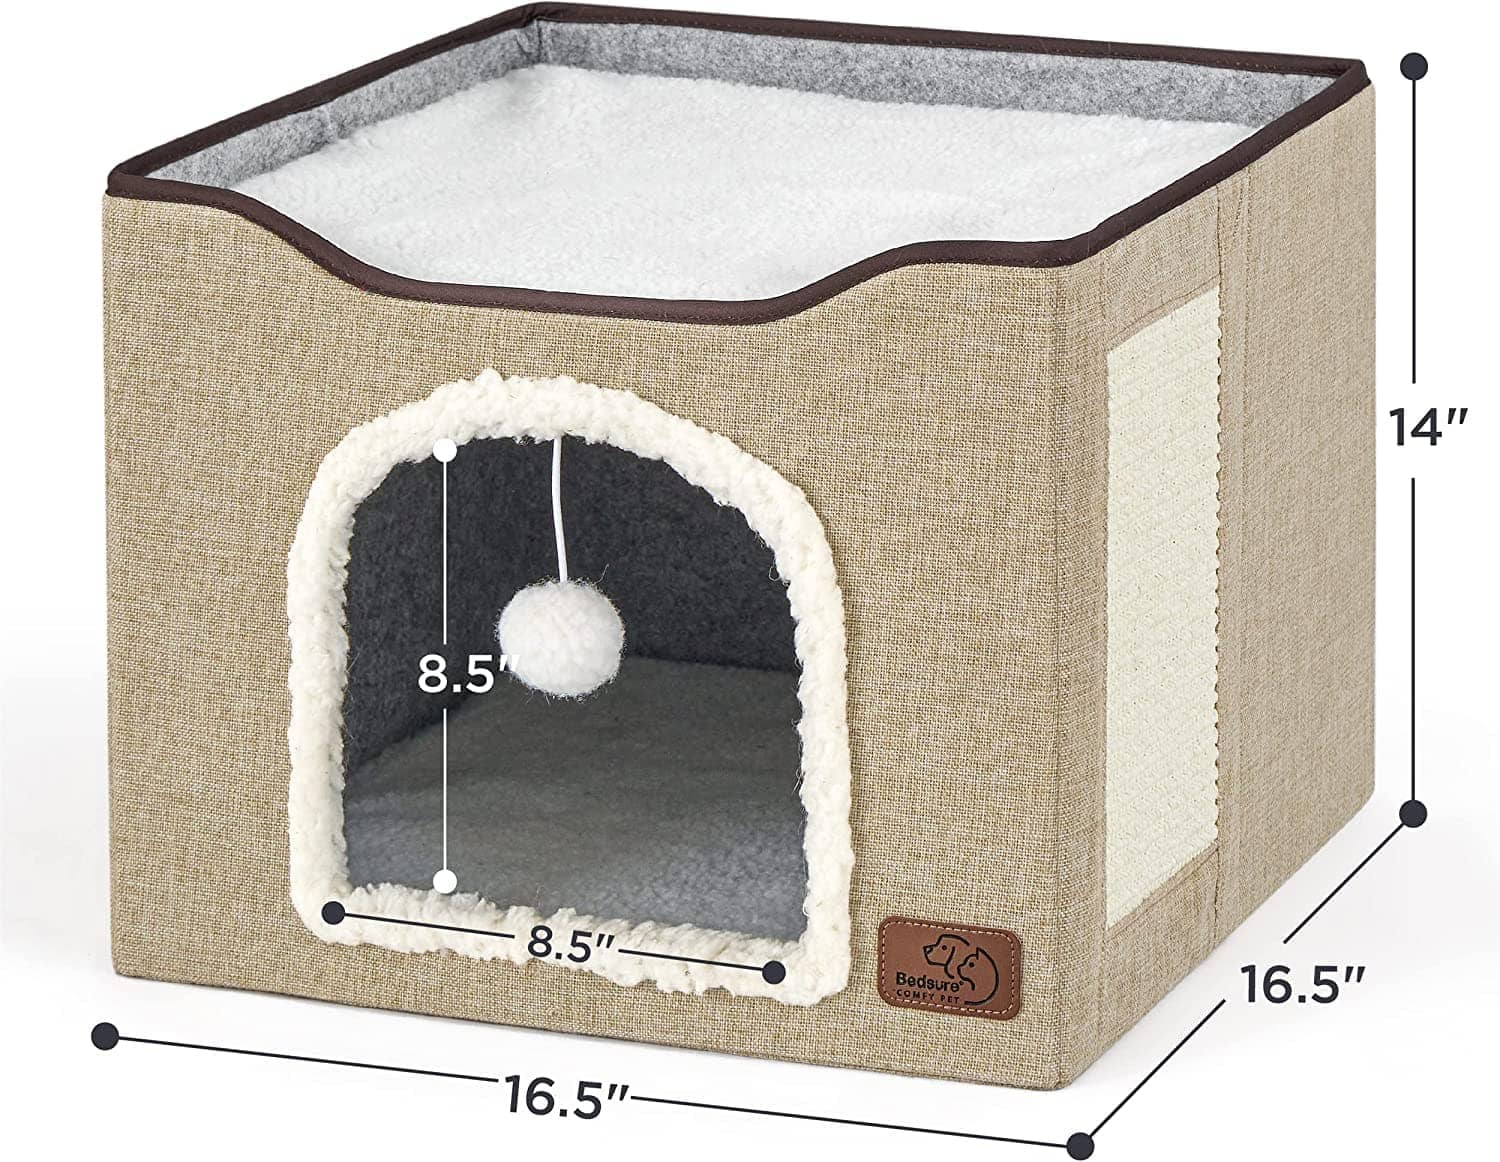 bedsure-cat-beds-for-indoor-cats-large-cat-cave-for-pet-cat-house-with-fluffy-ball-hanging-and-scratch-pad-foldable-cat-hideaway-16-5x16-5x14-inches-brown